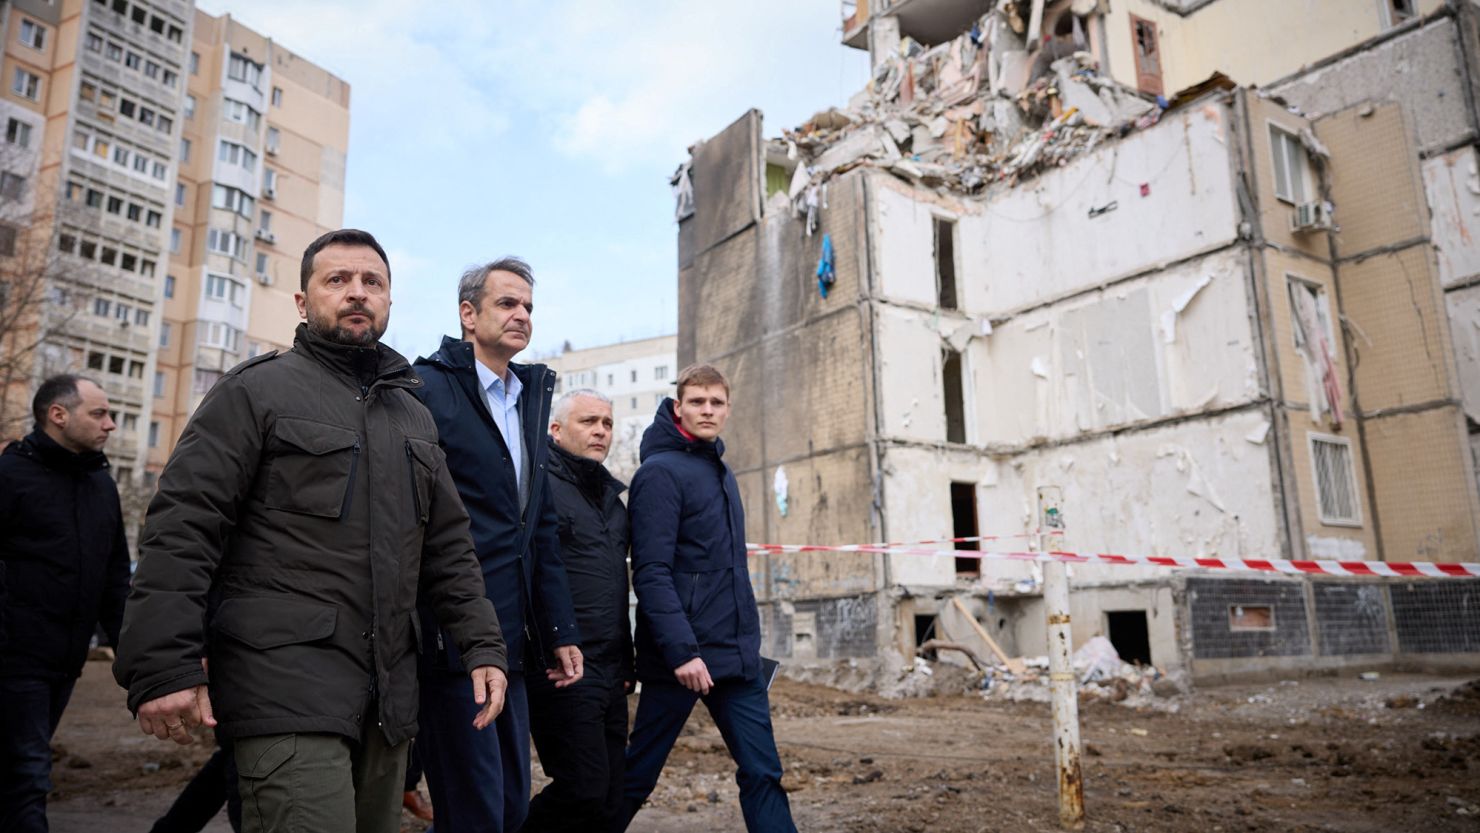 Zelensky said the missile struck close to where he had been meeting with Mitsotakis, third from right.